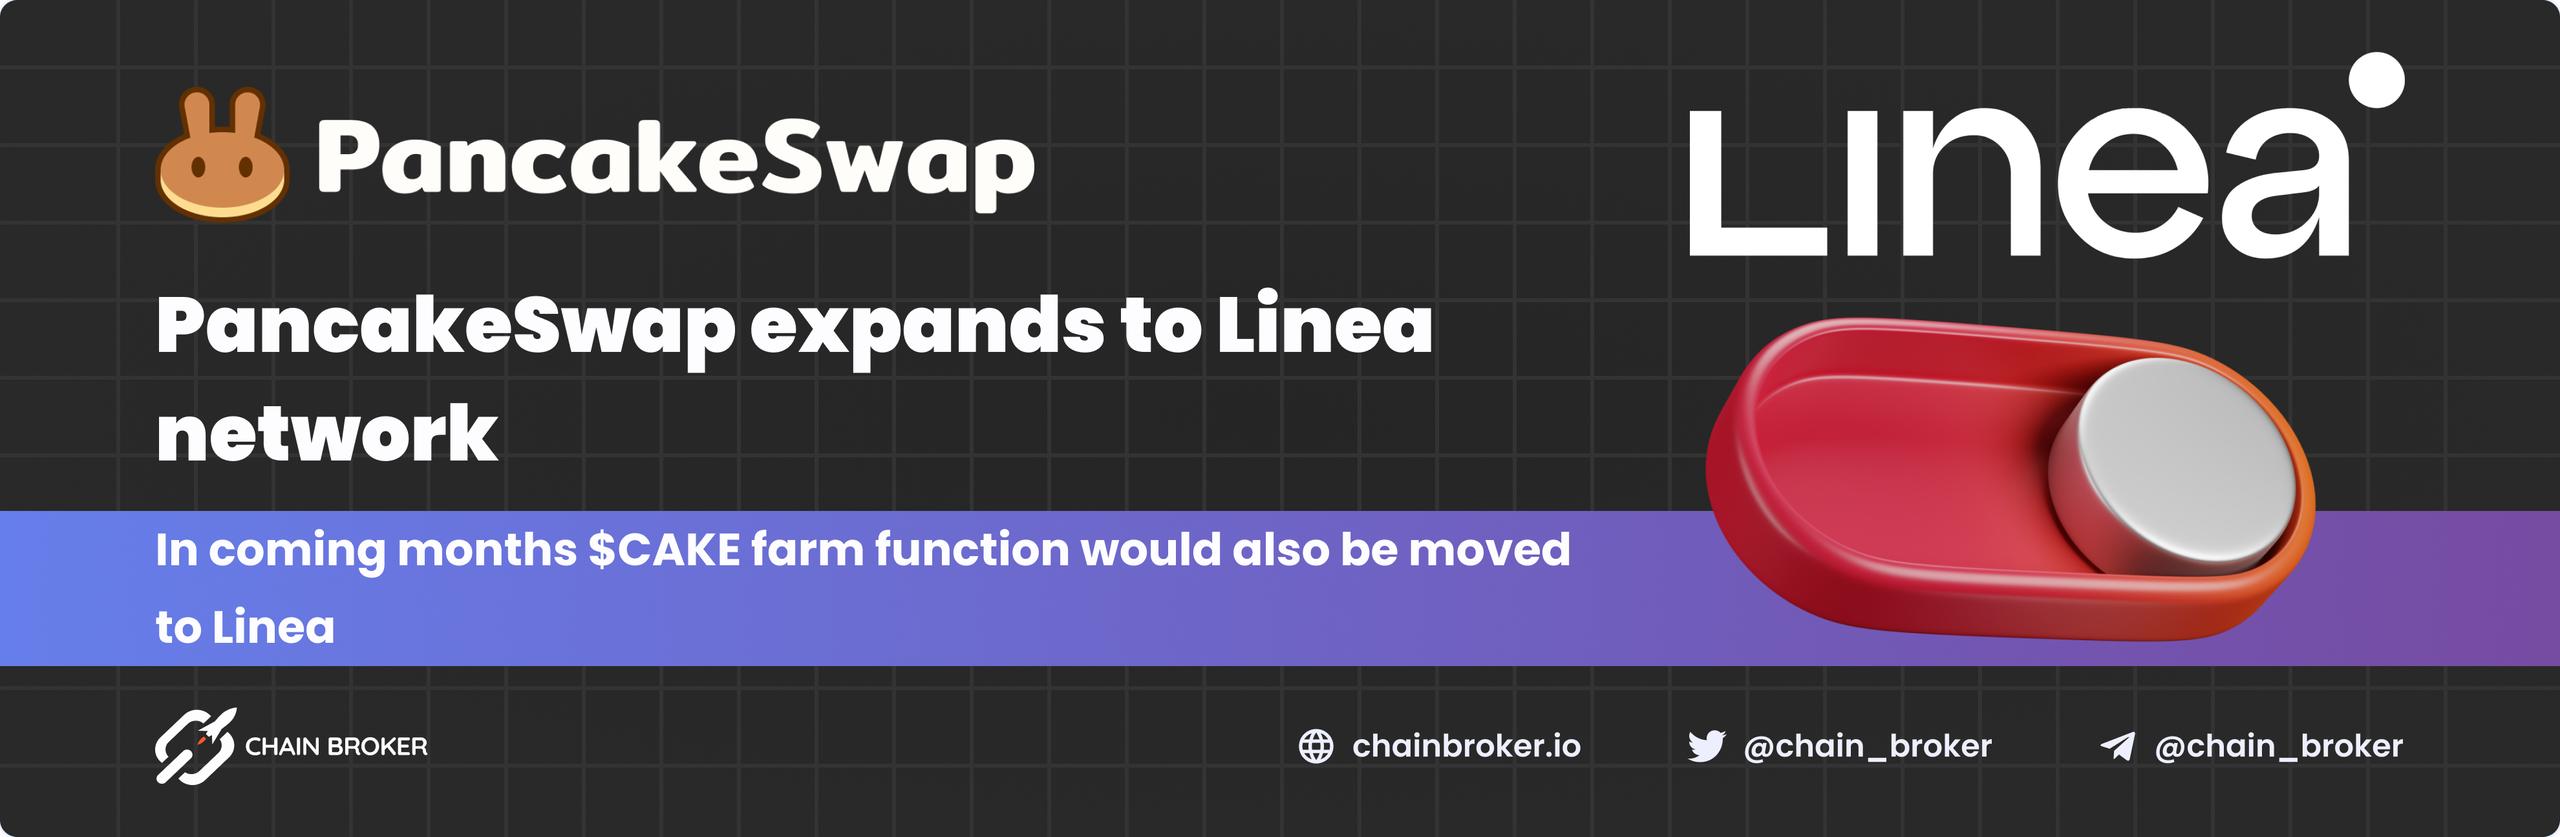 PancakeSwap expands to Linea L2 network.